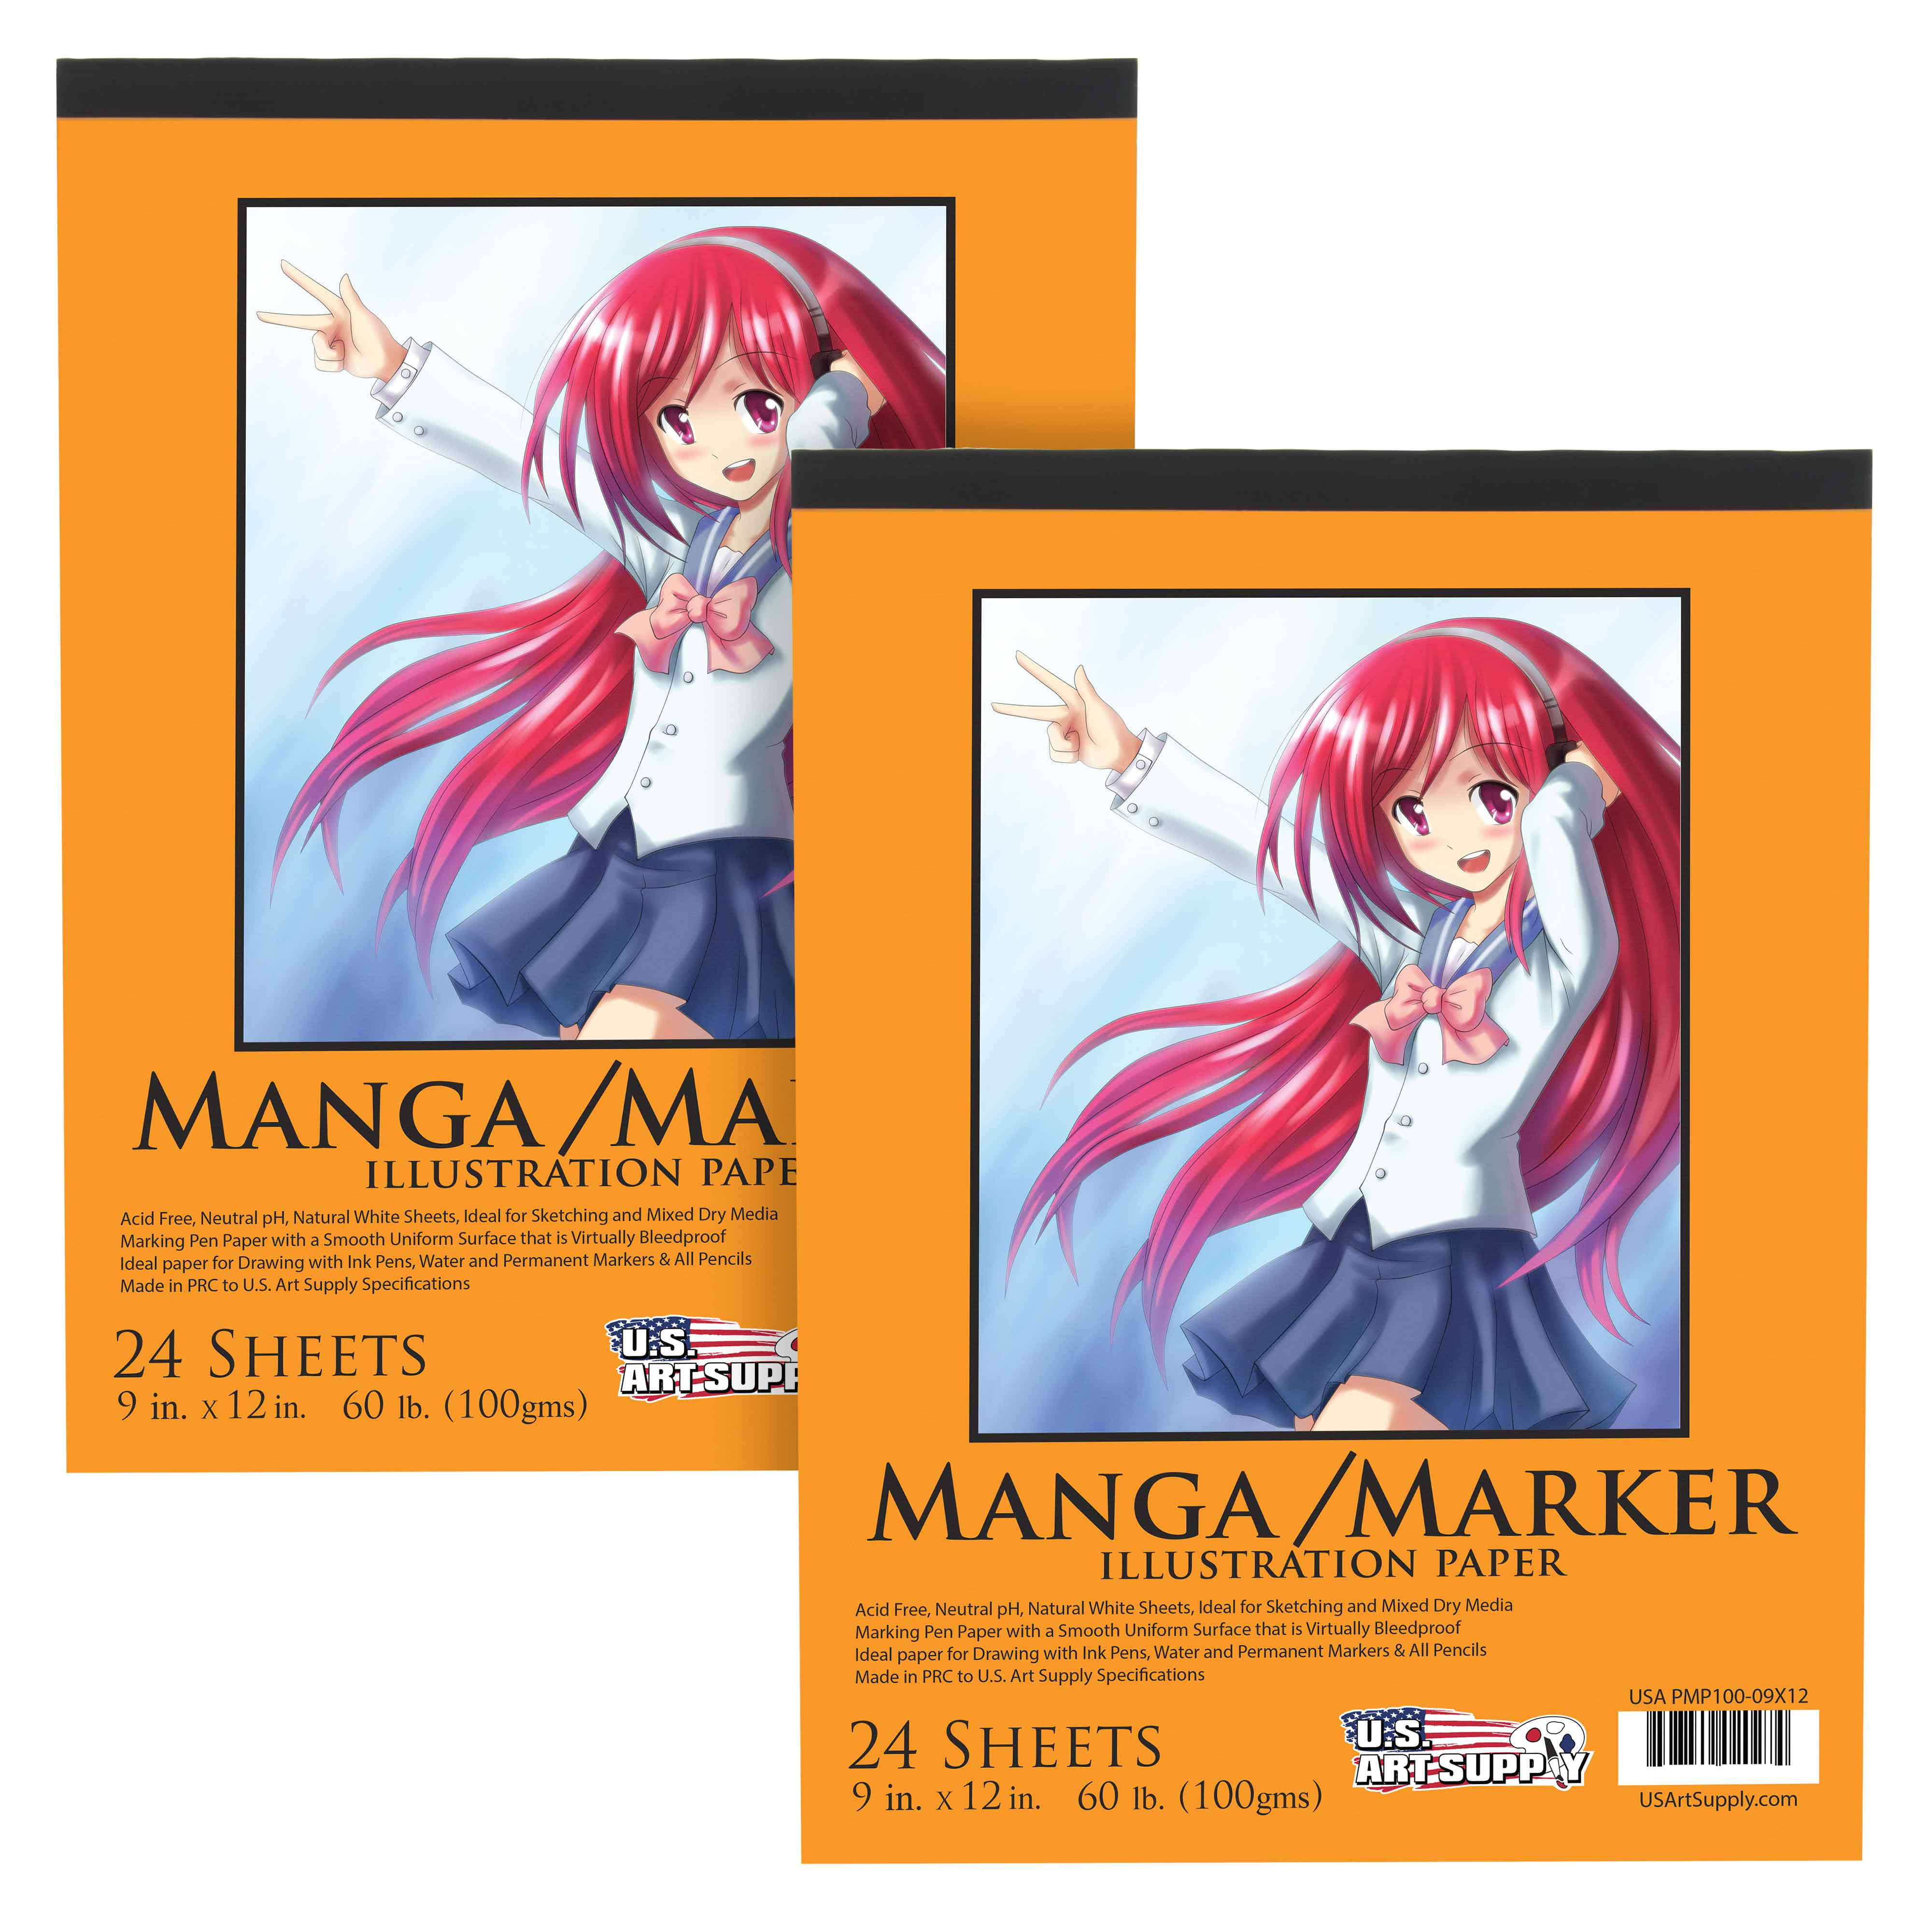 Art Supplies Reviews and Manga Cartoon Sketching: Canson XL Marker Paper Pad  first doodle tests